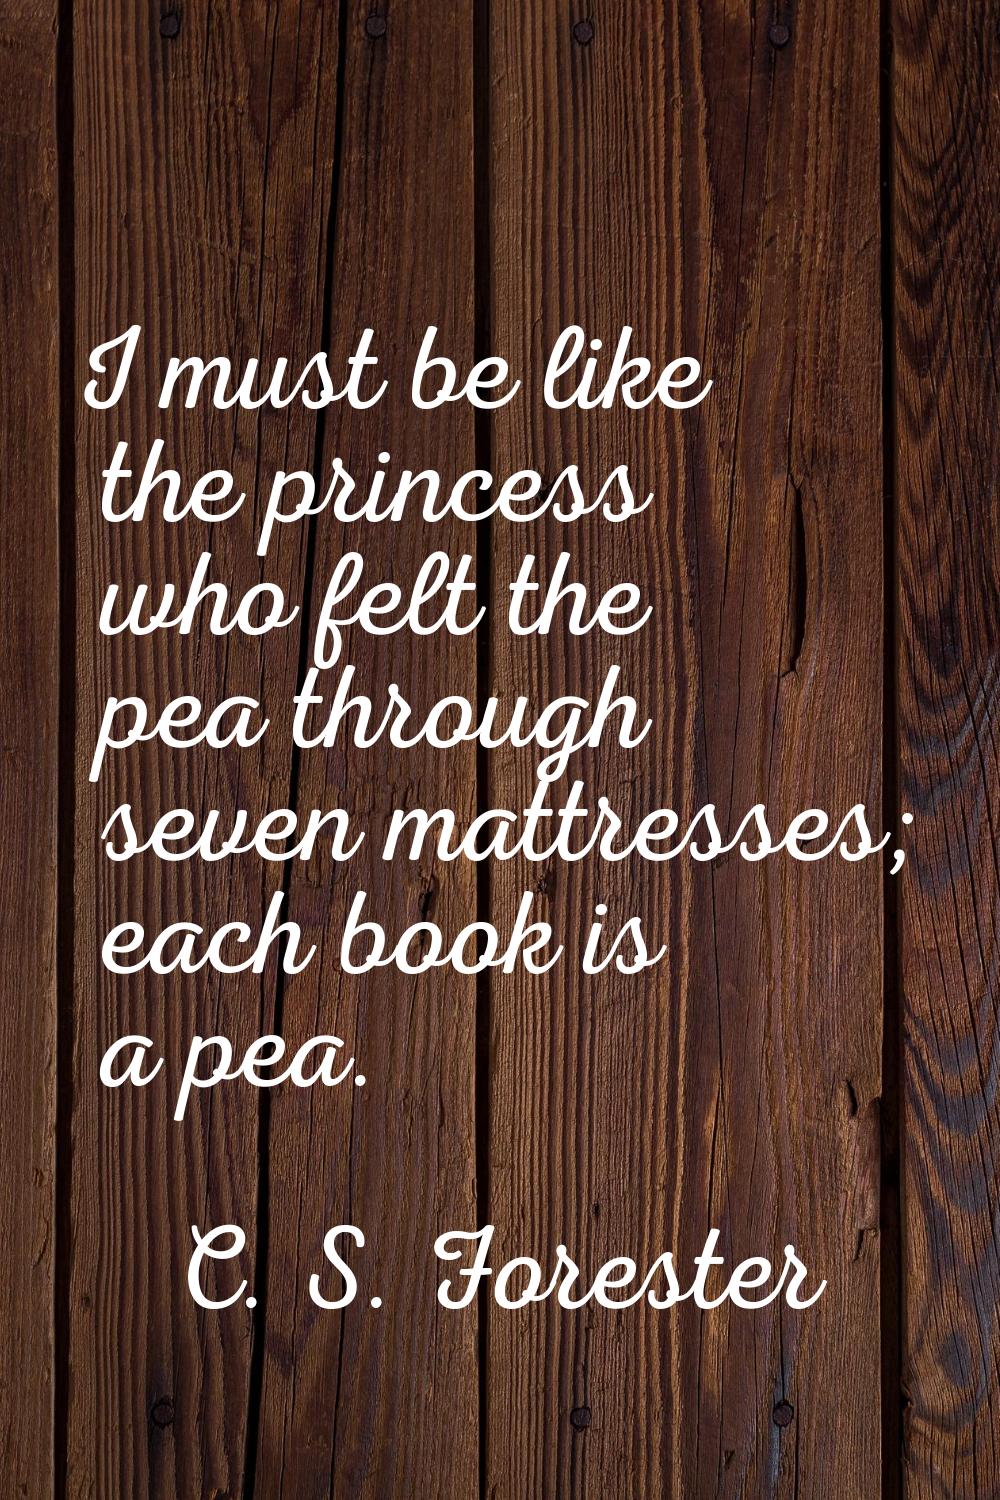 I must be like the princess who felt the pea through seven mattresses; each book is a pea.